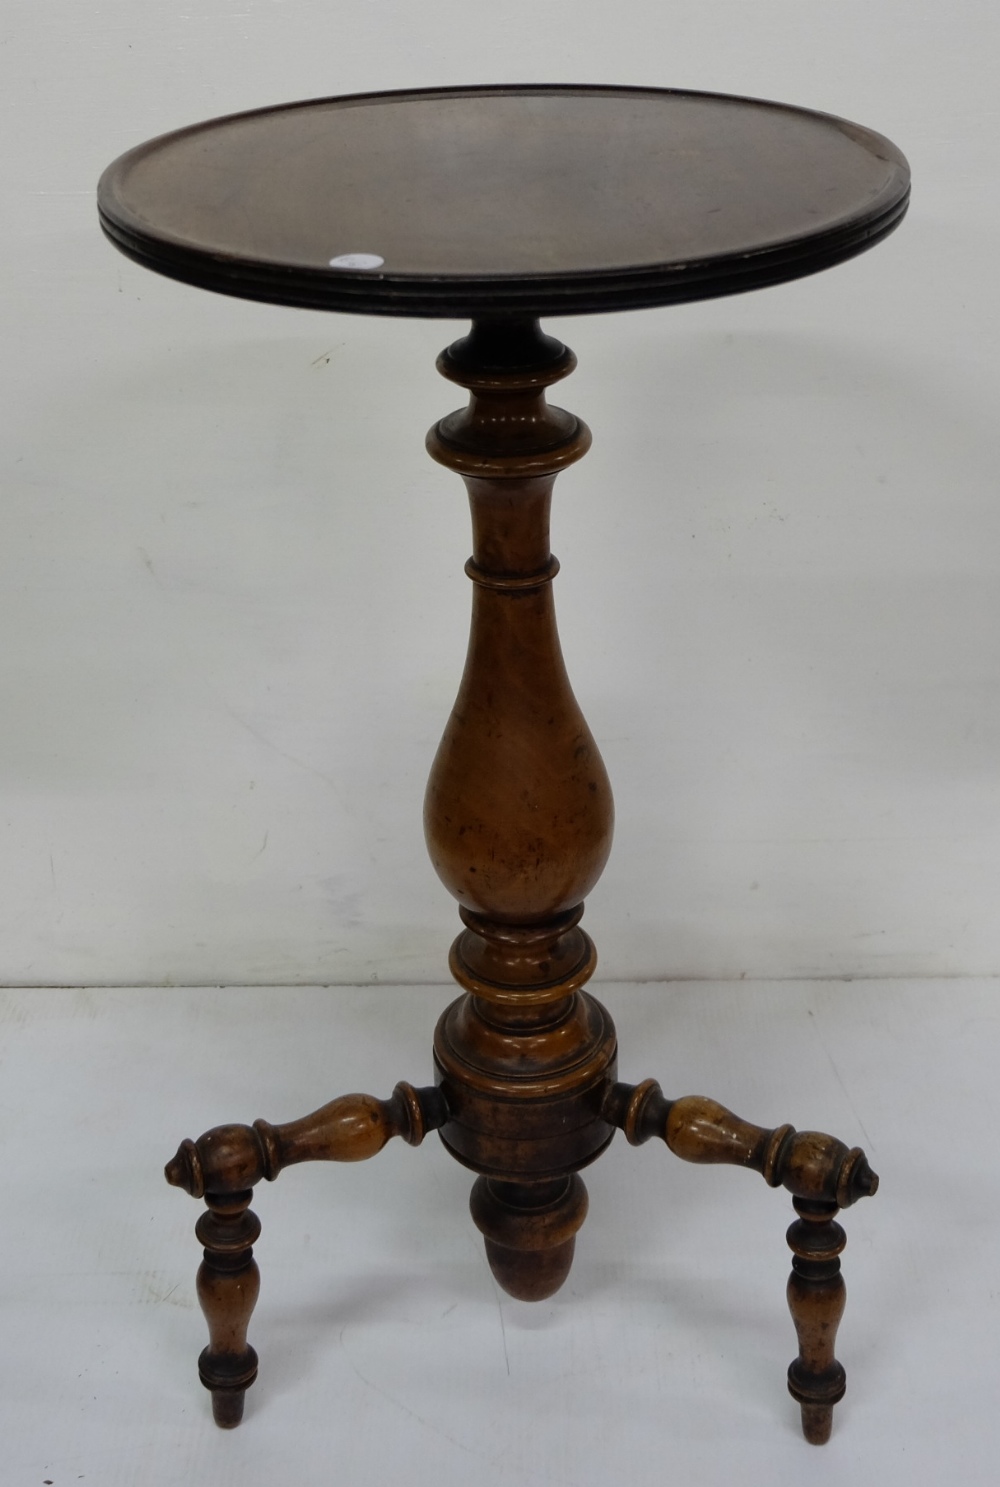 Mahogany Wine Table, circular top 13” dia, on a tripod base with turned legs - Image 2 of 2